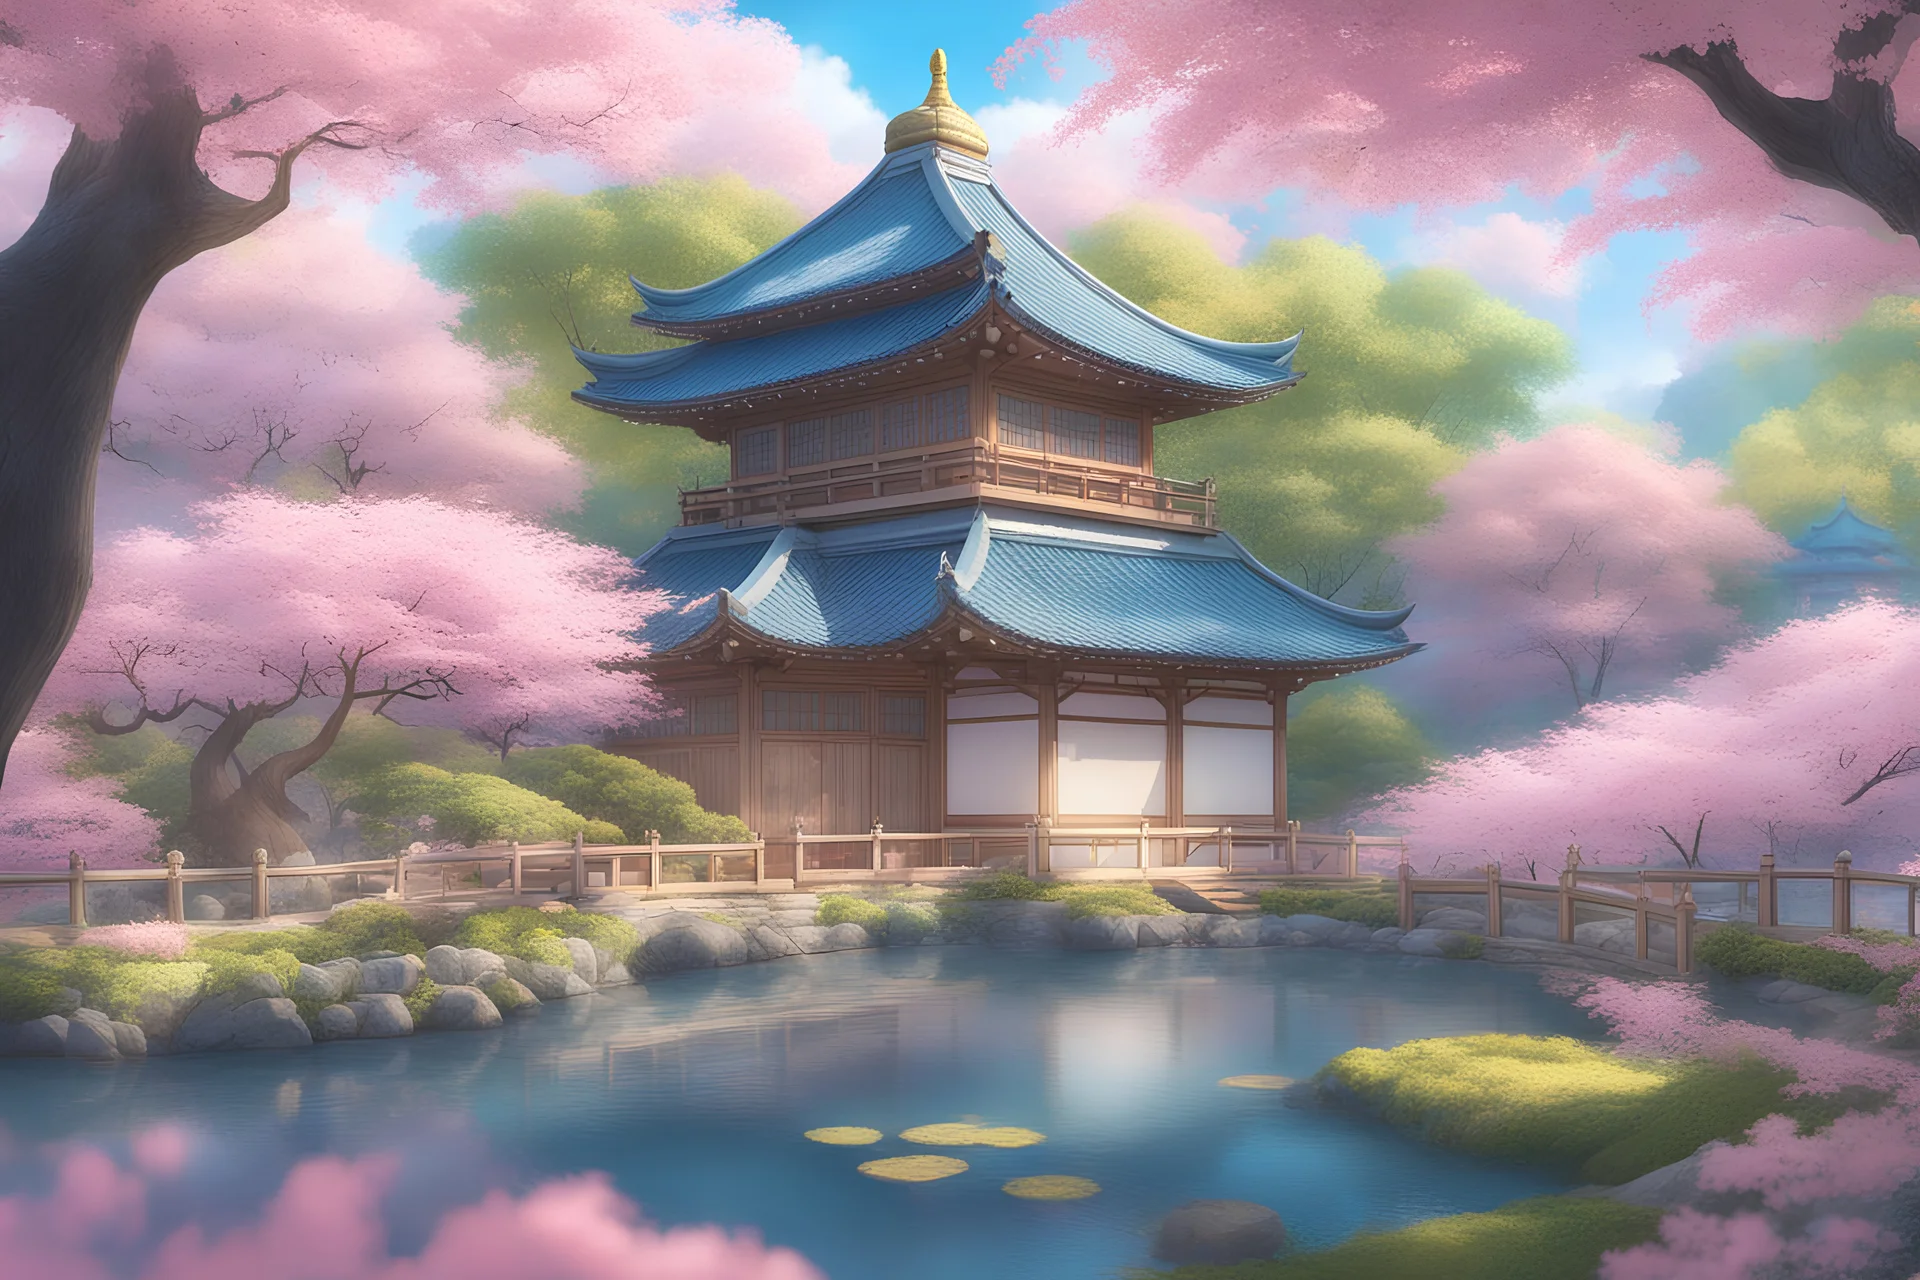 japonese garden and house, blue sky, fairy, flowers, trees, sunny day, pink, blue, yellow lights, 8K, extremely sharp details enlighten, soft smile, wonderful castle, majestic, art background, intricate, masterpiece, expert, insanely detailed, 4k resolution, intricate detail, soft smooth lighting, light pink blue colours, 8k, splash art, wallpaper, key visual